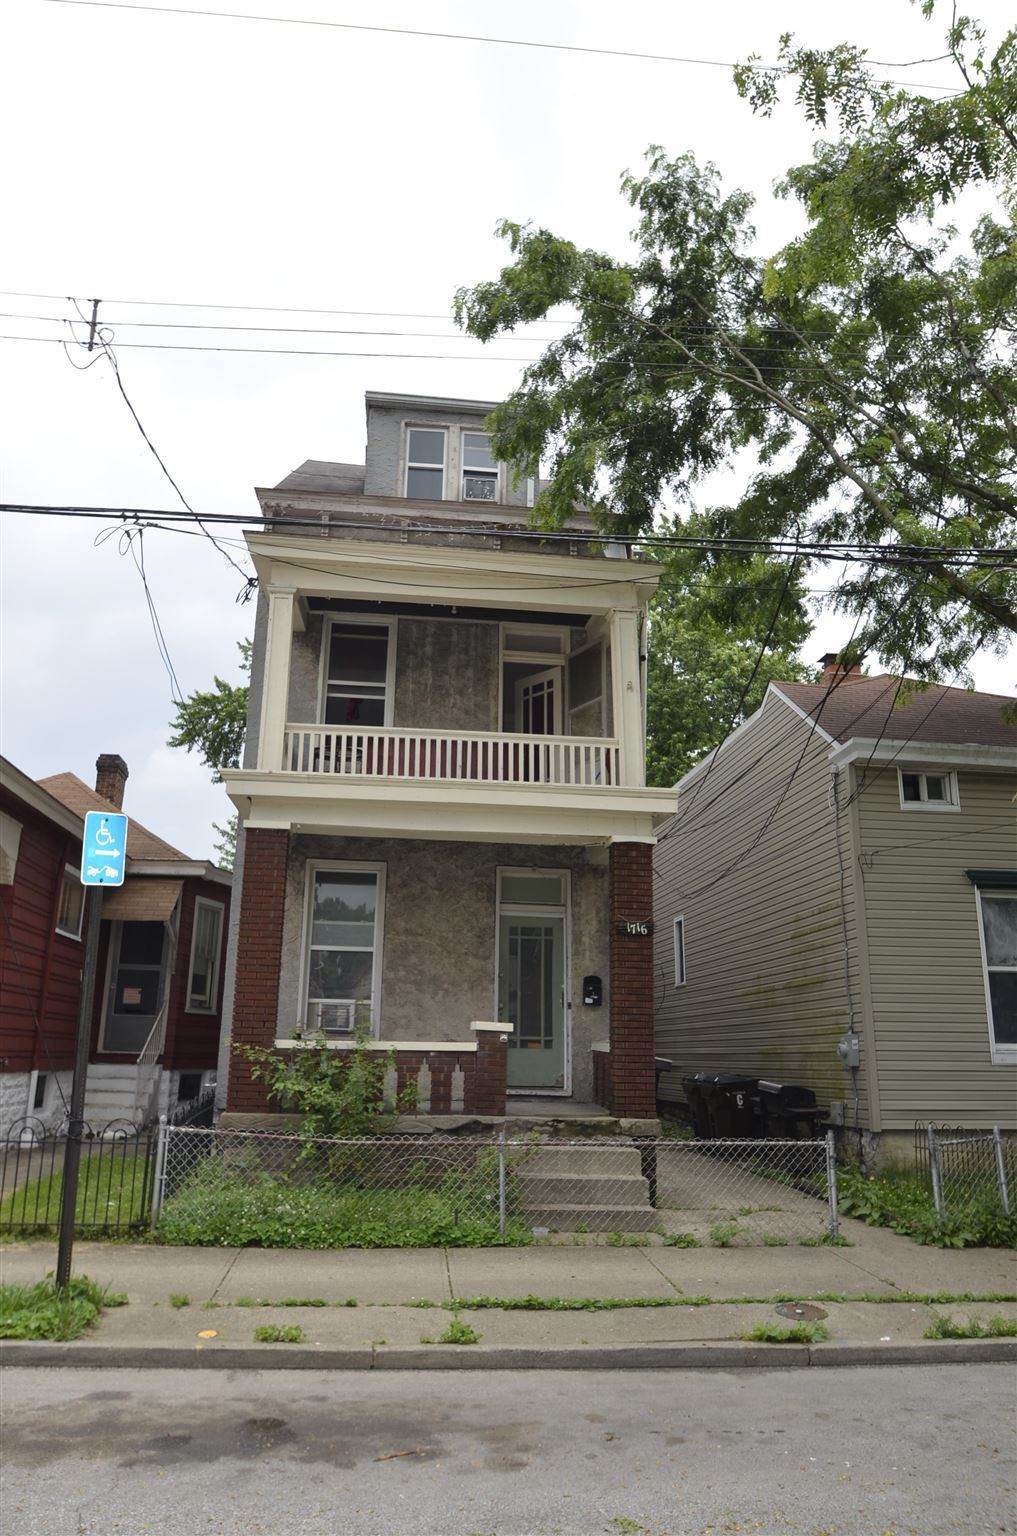 2. Multi Family for Sale at 1716 Banklick 1716 Banklick Covington, Kentucky 41011 United States